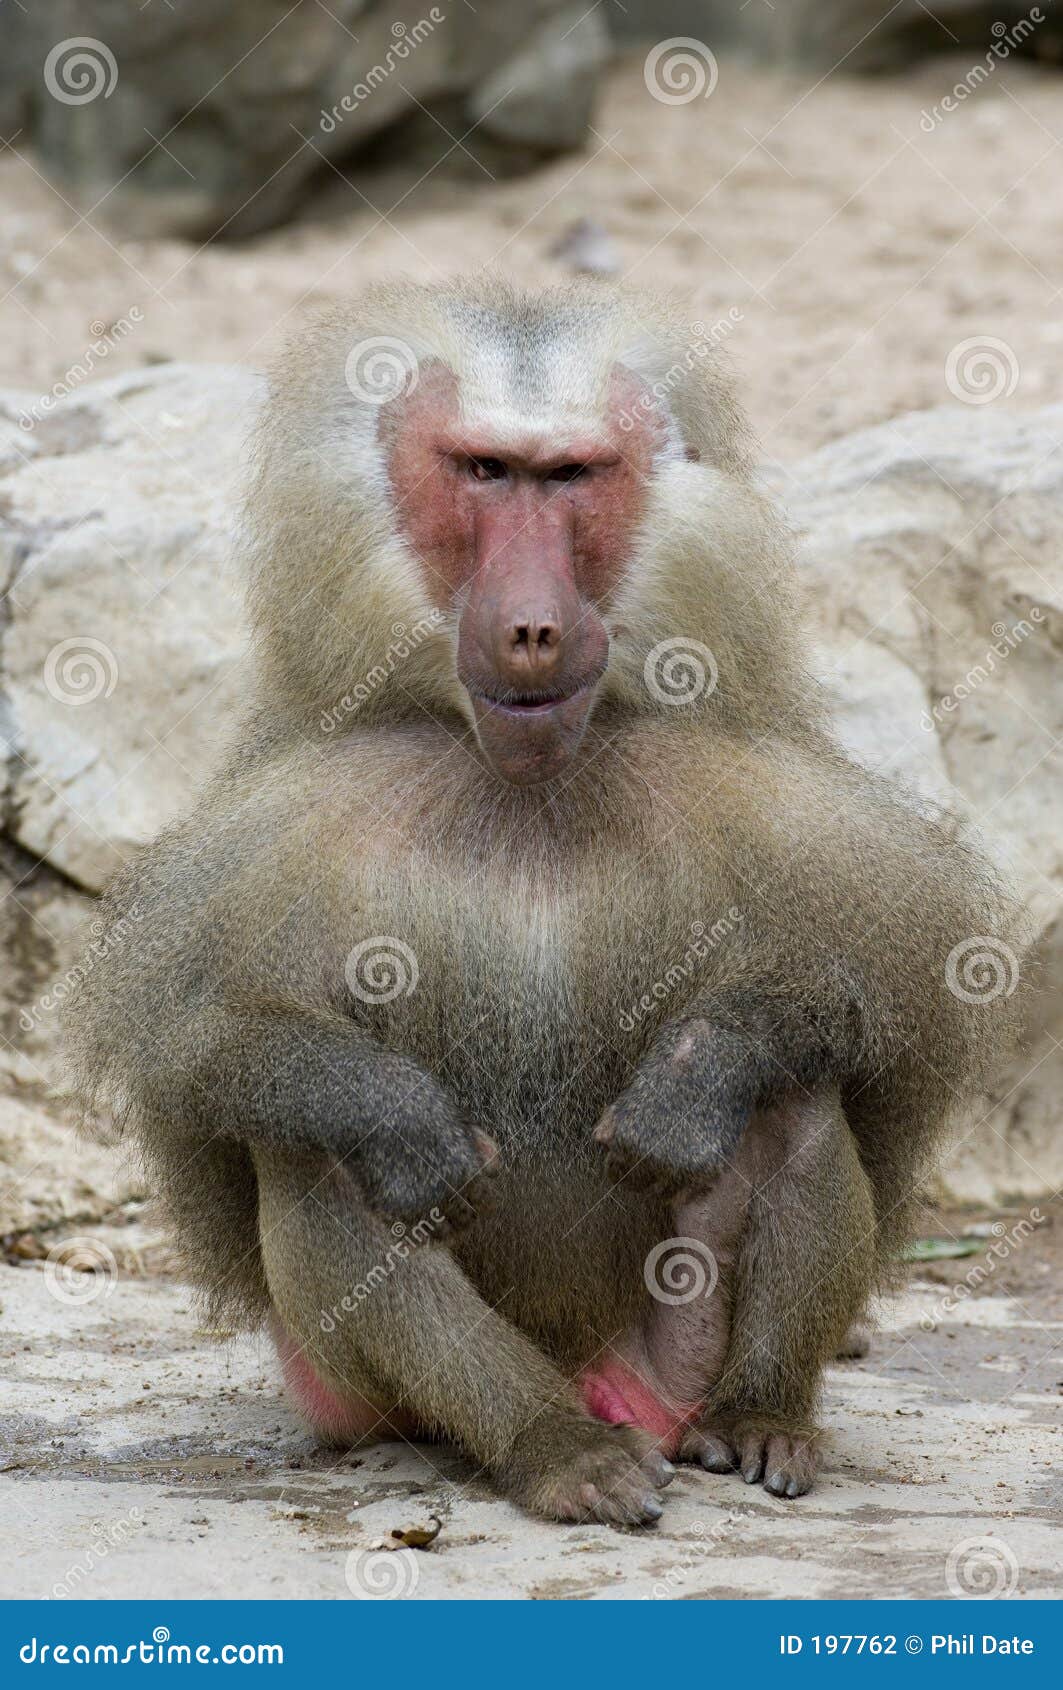 257 Ugly Monkey Photos Free Royalty Free Stock Photos From Dreamstime